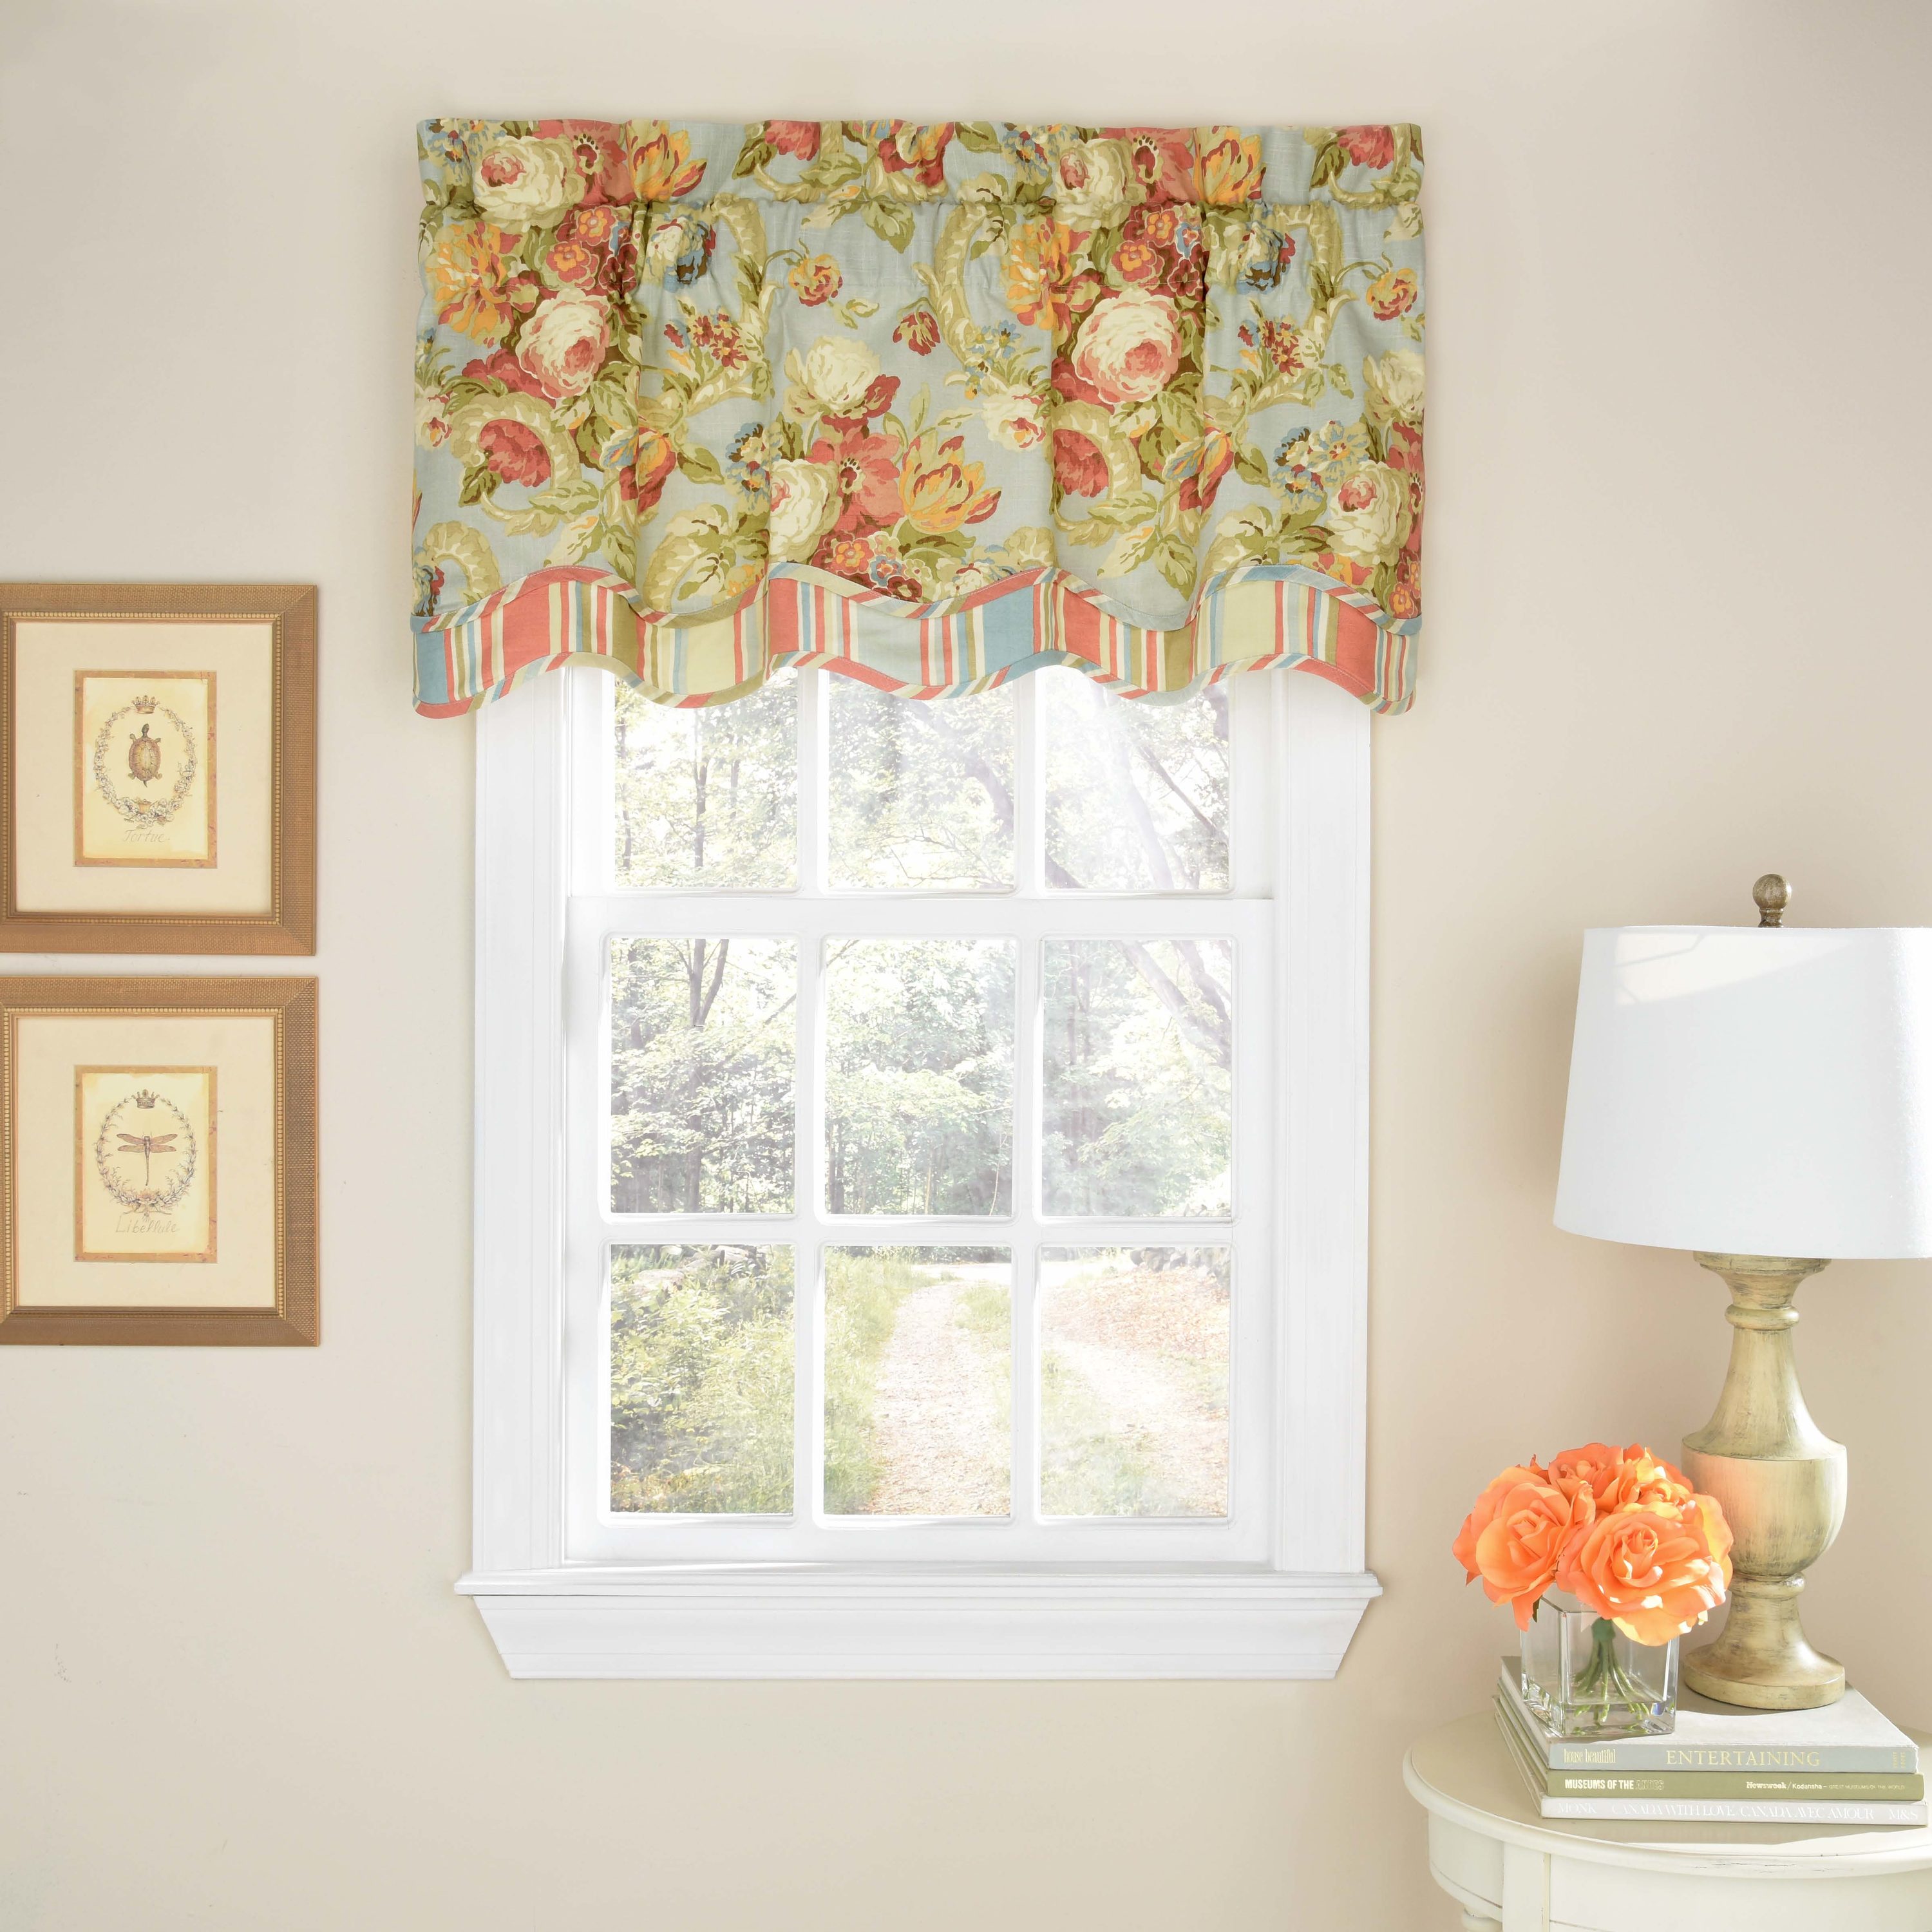 Valances Rod 18-in department Pocket Vapor Bling Valance Waverly the at in Spring Cotton